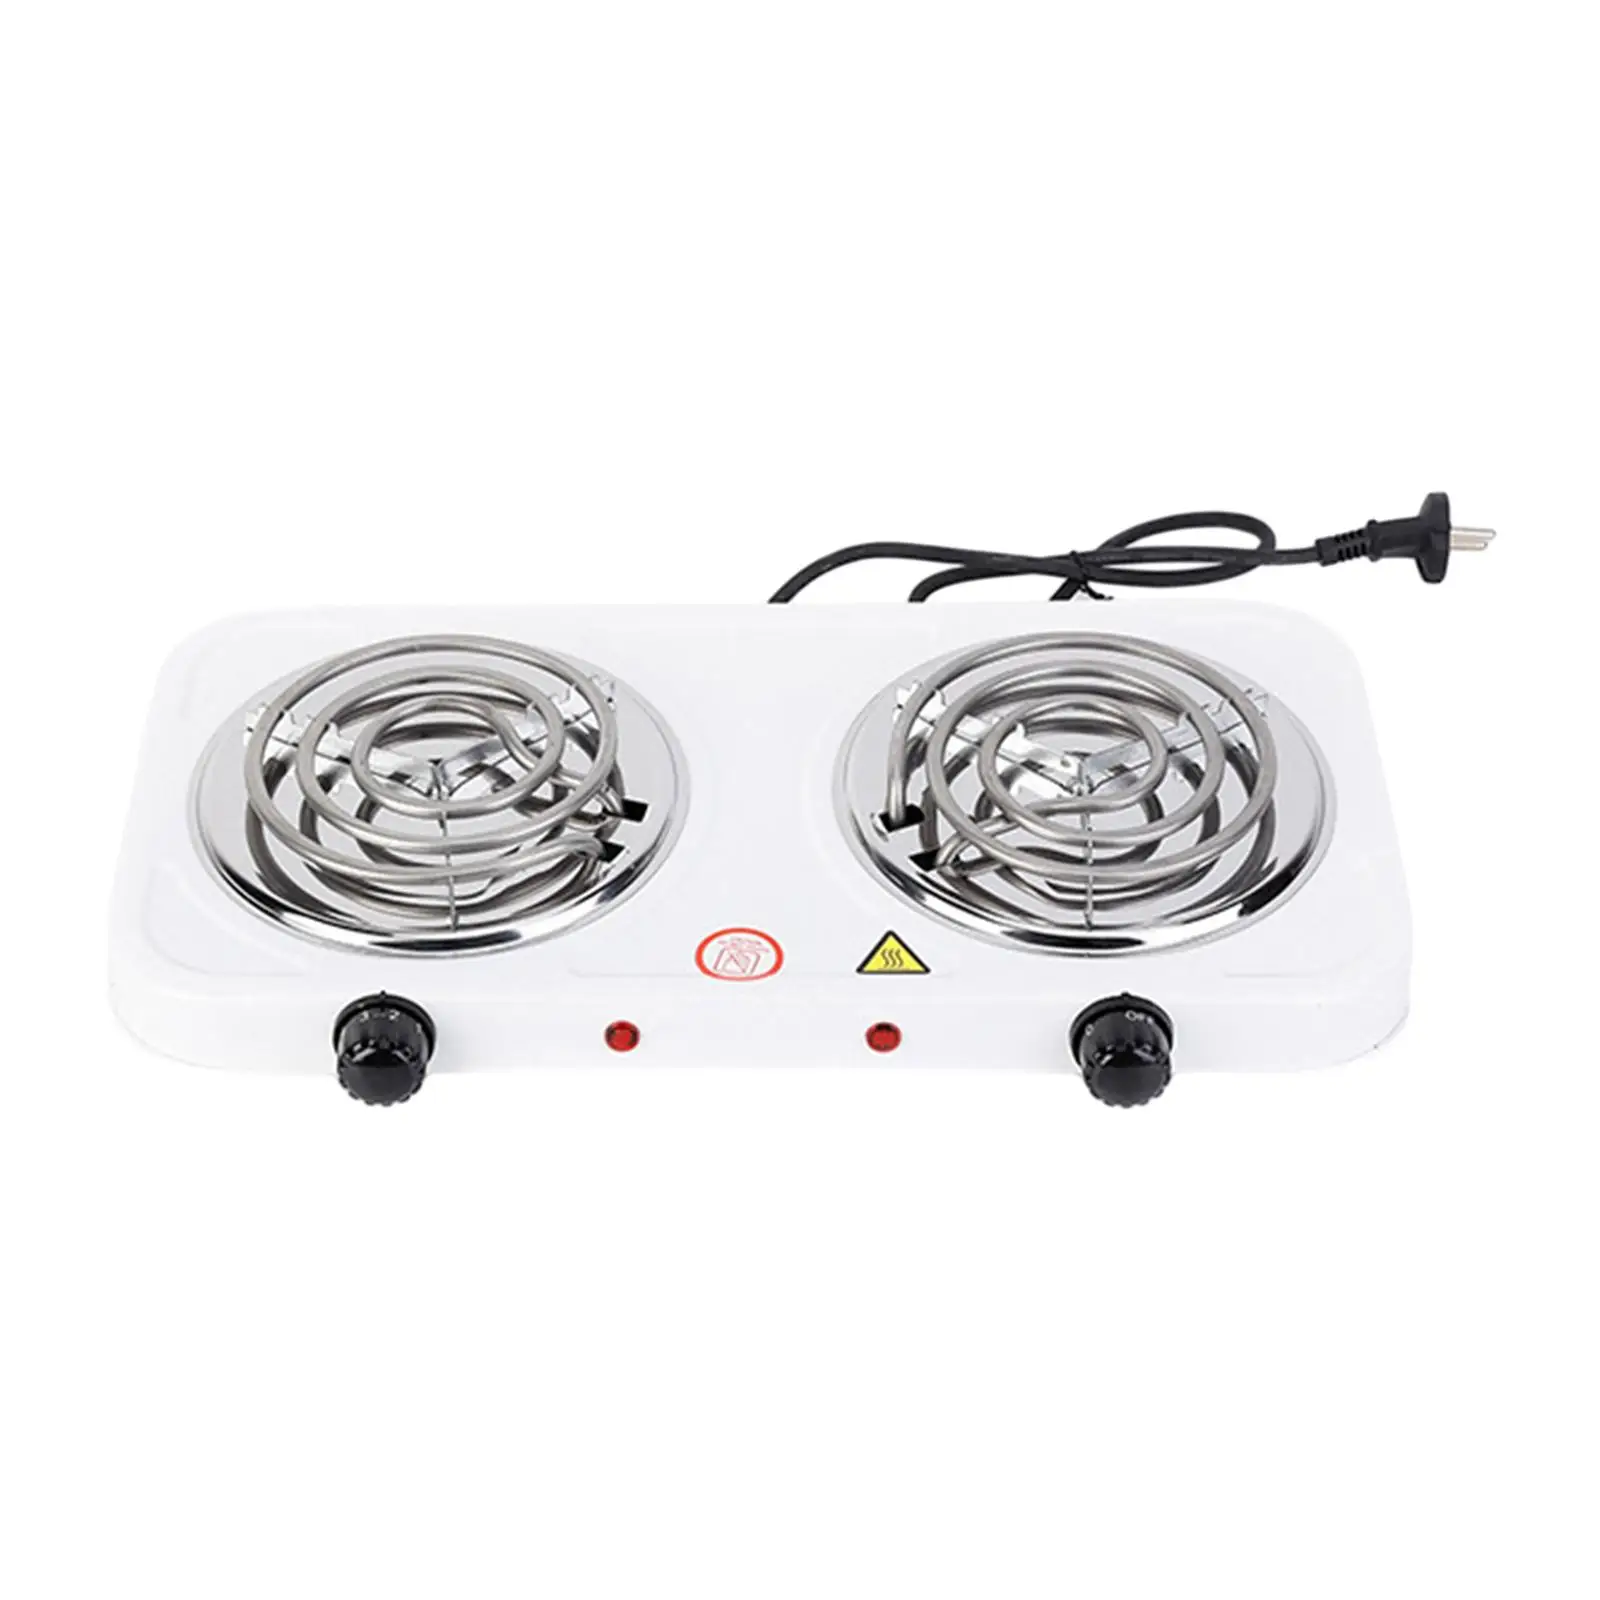 Electric Double Coil Burner for Home, Travel, Outdoor Activities Adjustable Temperature Knob 2000W with Indicator Lights Compact